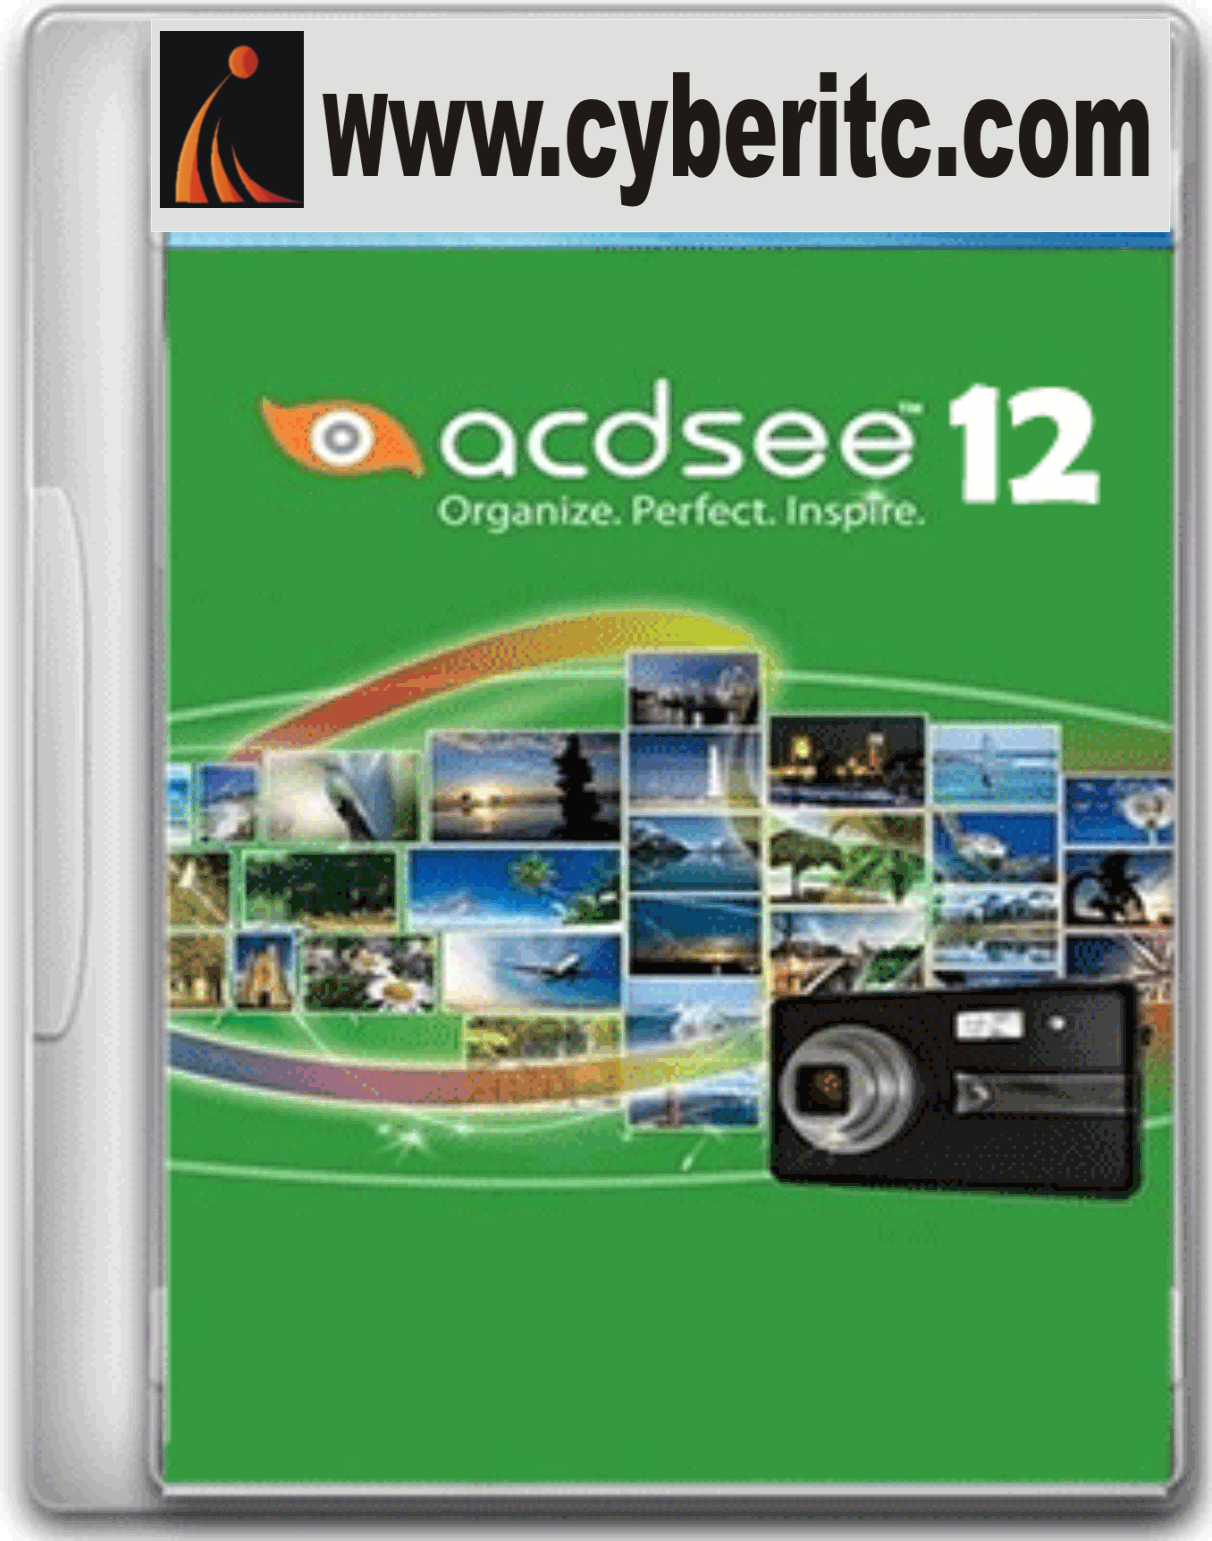 acdsee photo manager 12 software download